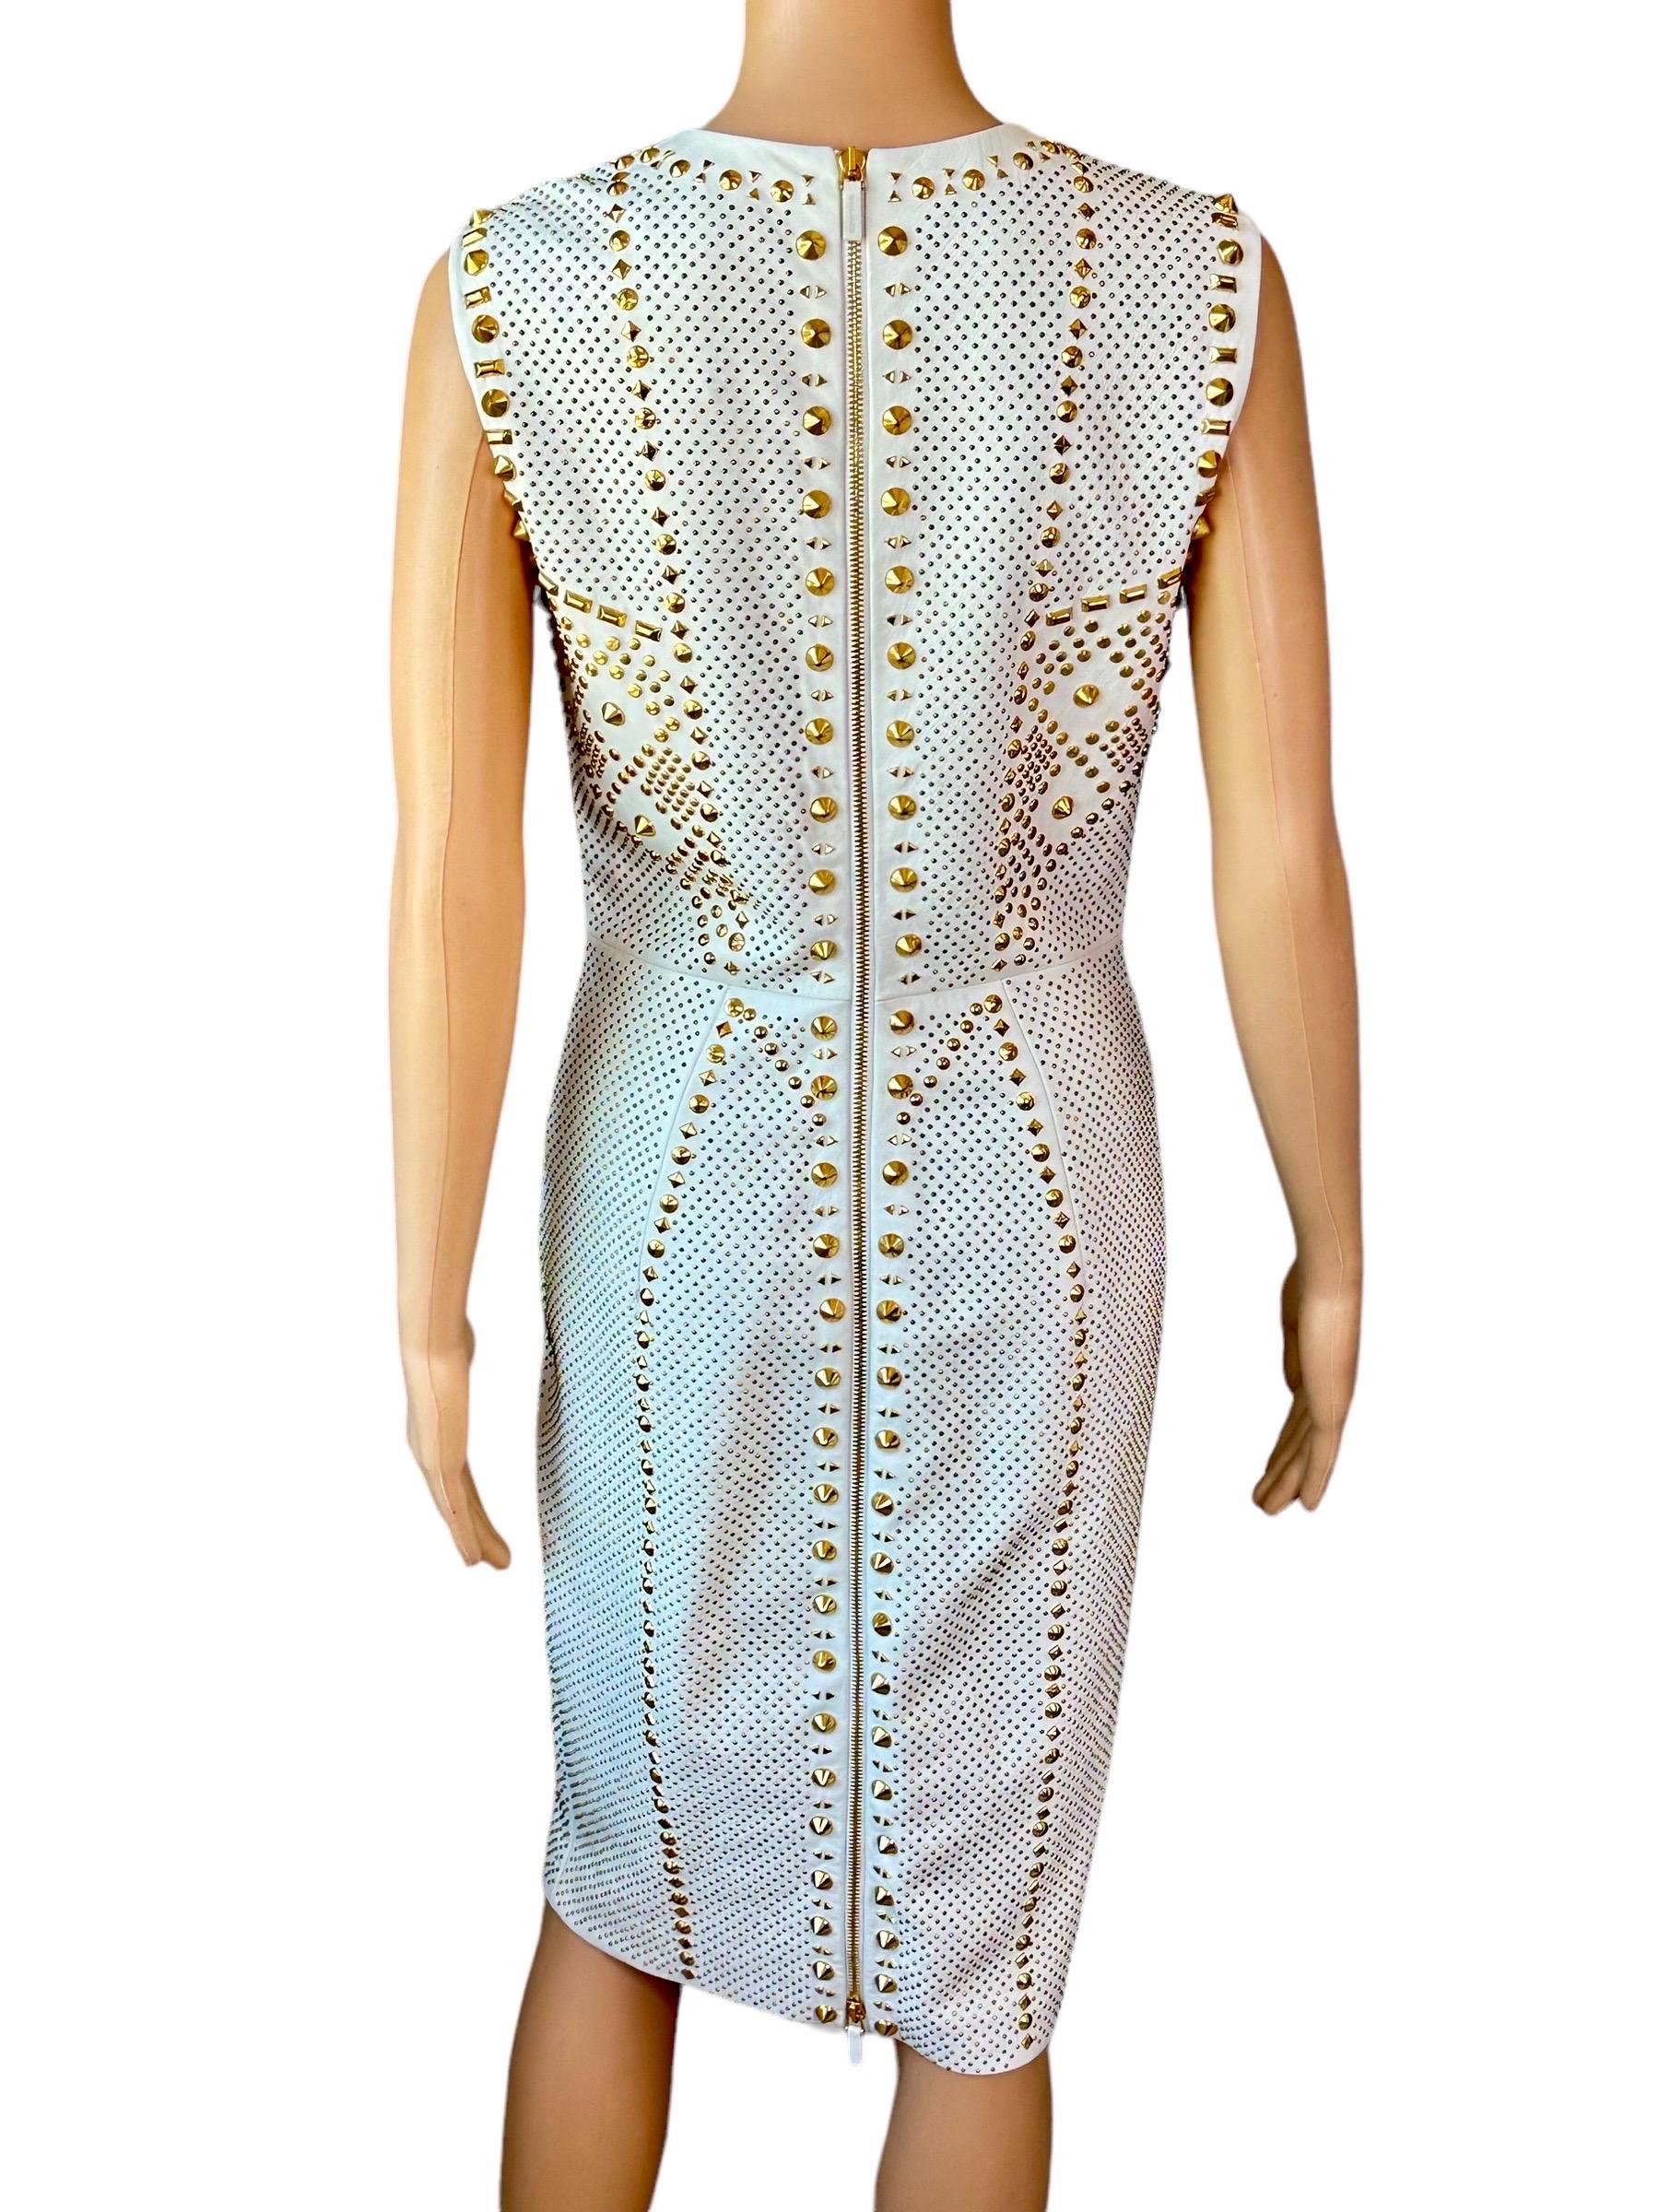 Versace S/S 2012 Runway Embellished Gold Studded Ivory Leather Dress  For Sale 8